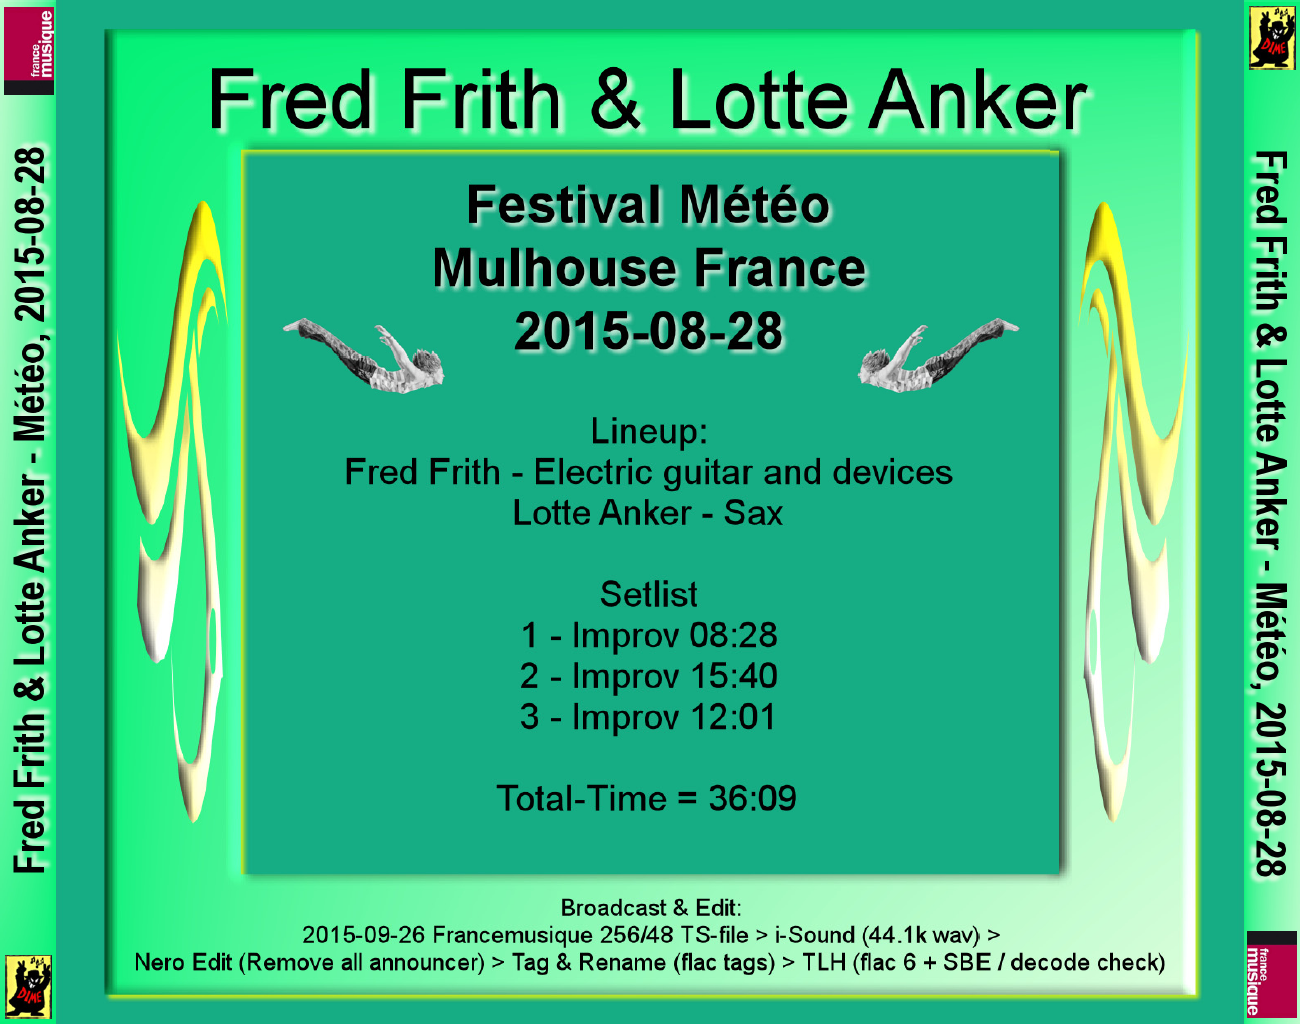 FredFrith2015-08-28LotteAnkerFestivalMeteoMulhouseFrance (5).png